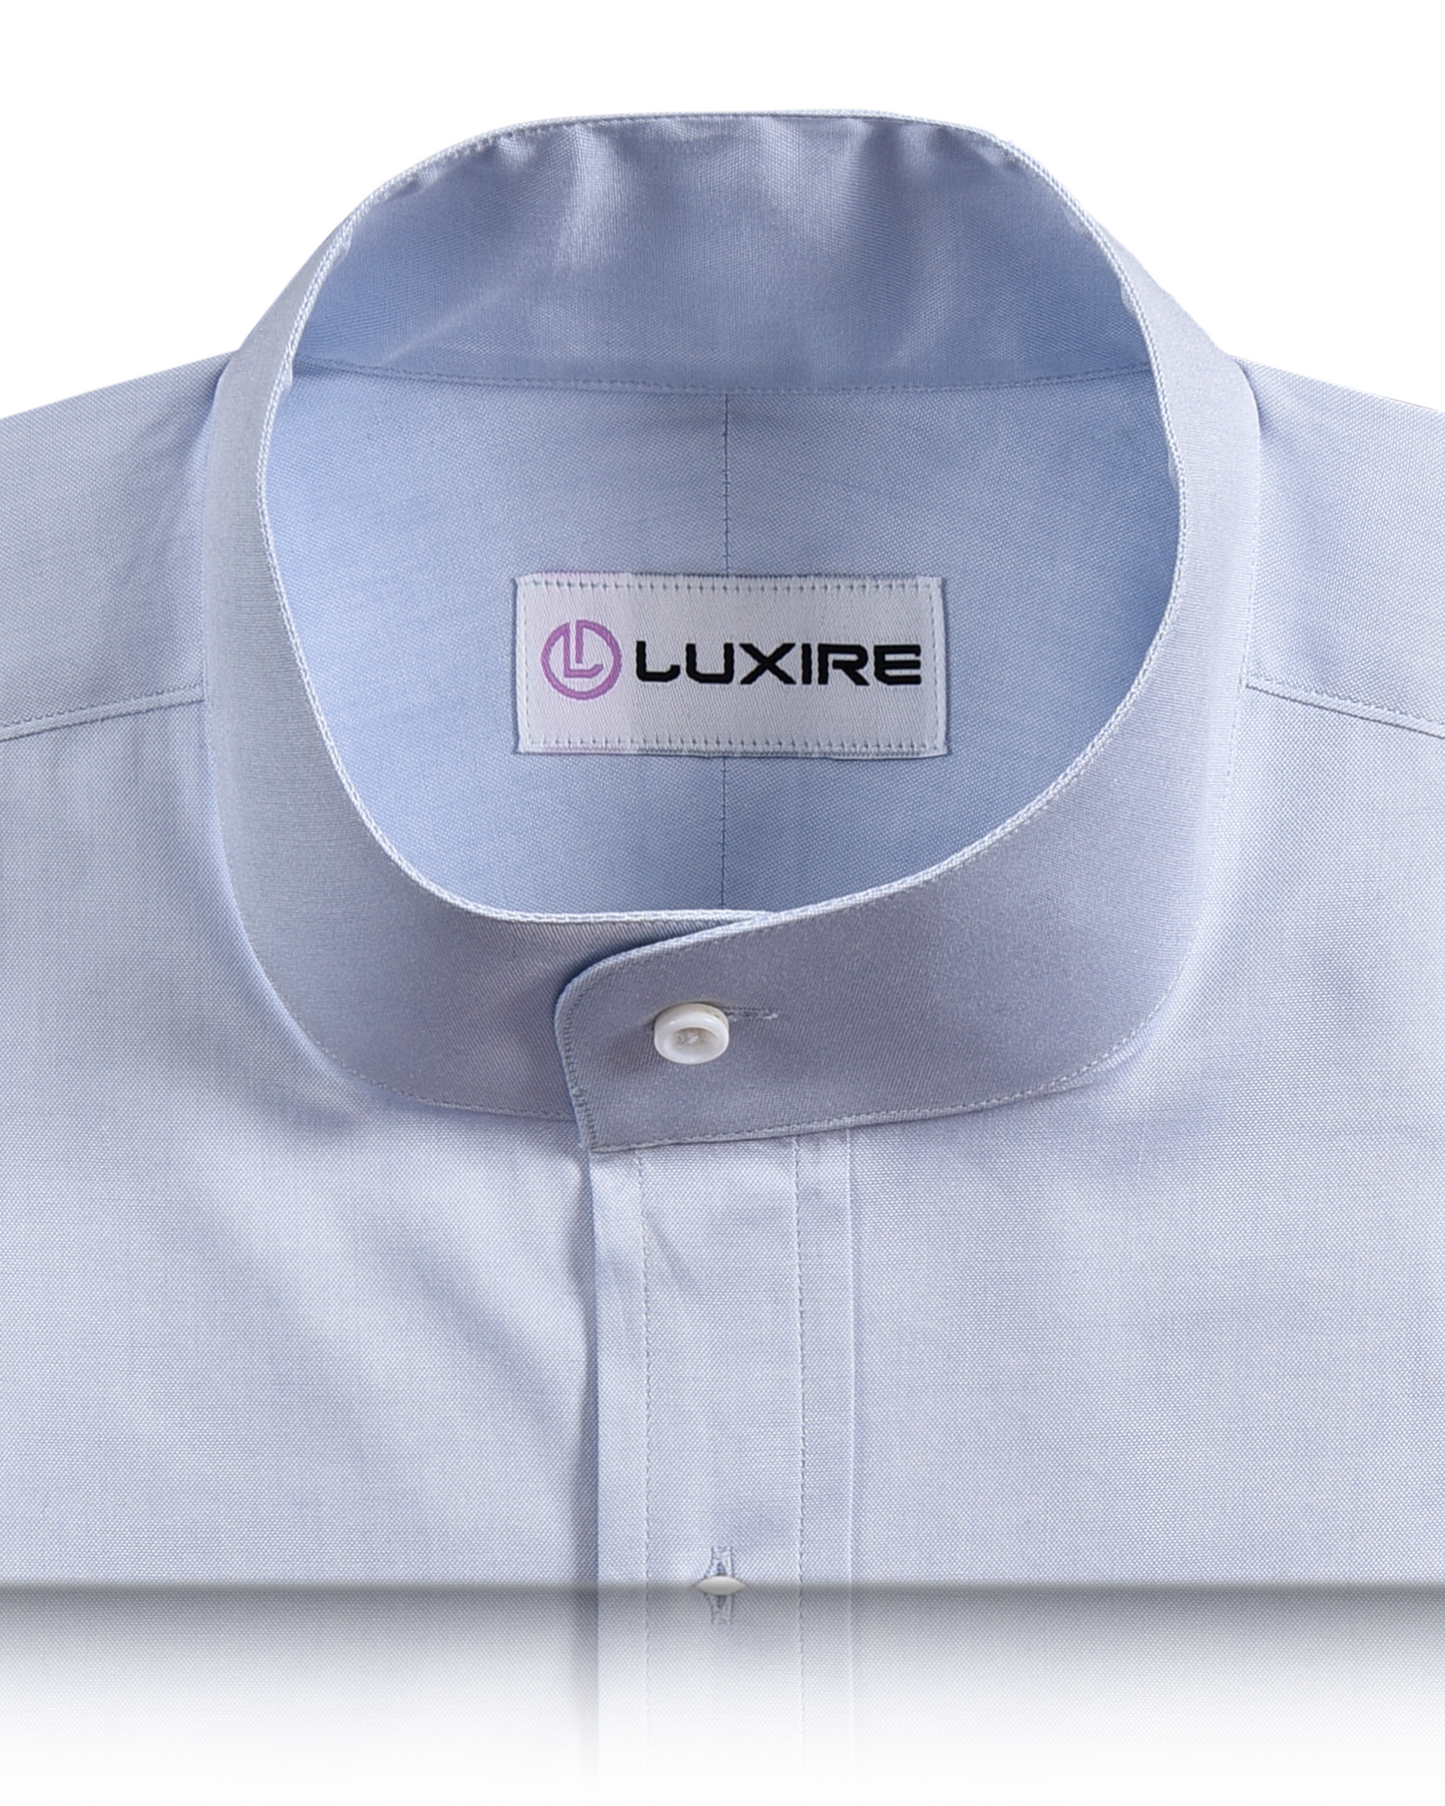 Collar of the custom oxford shirt for men by Luxire in mid blue